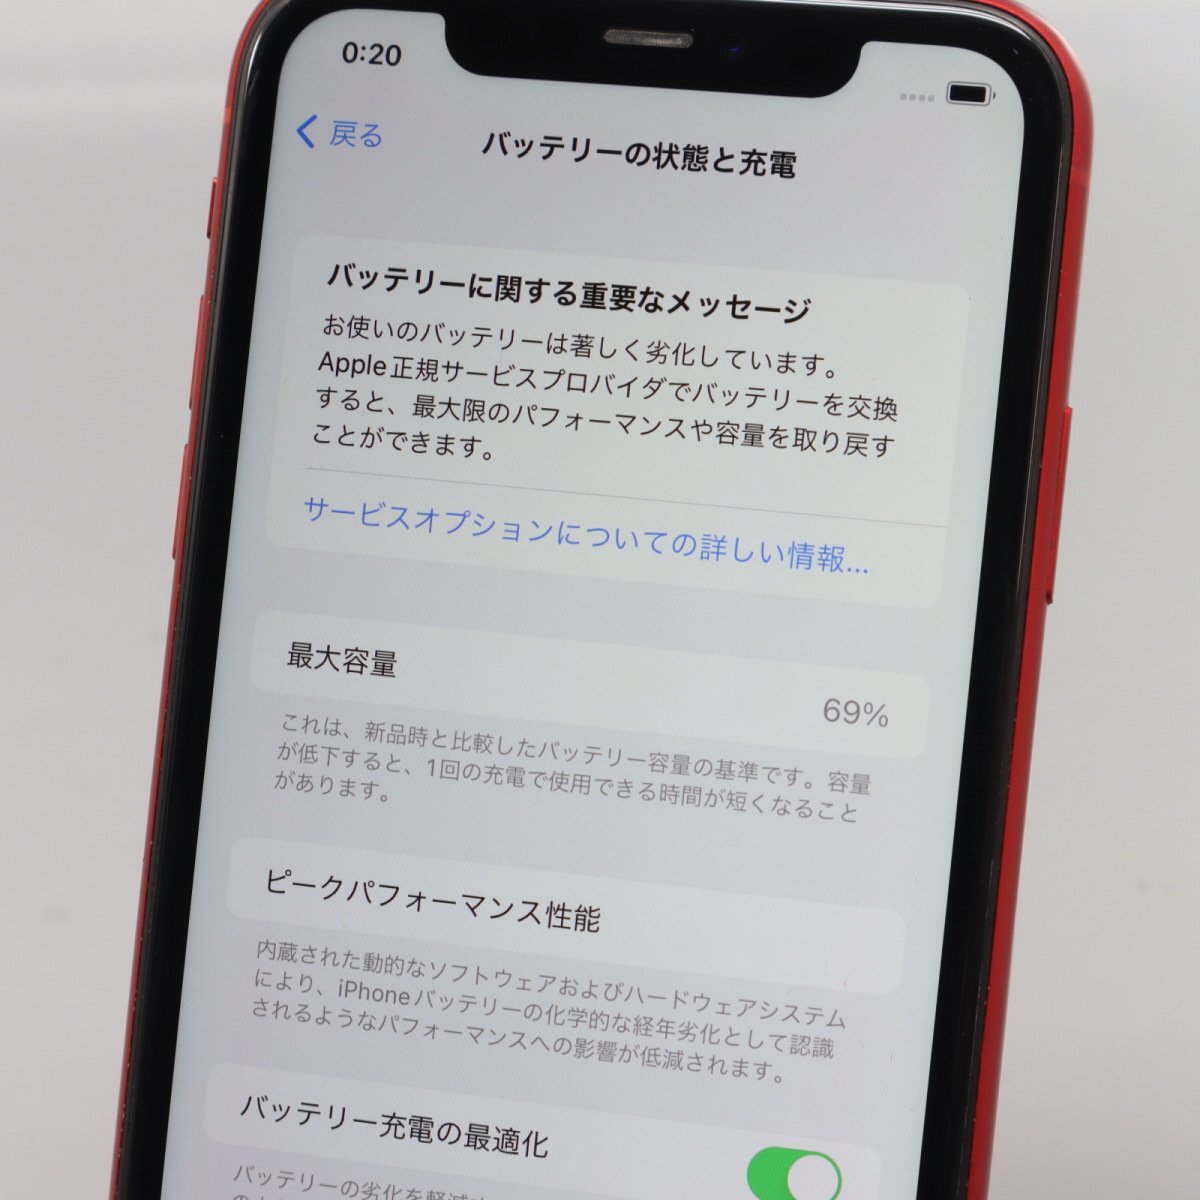 Apple iPhone11 128GB (PRODUCT)RED A2221 MWM32J/A バッテリ69% ■ソフトバンク★Joshin(ジャンク)9610【1円開始・送料無料】の画像4